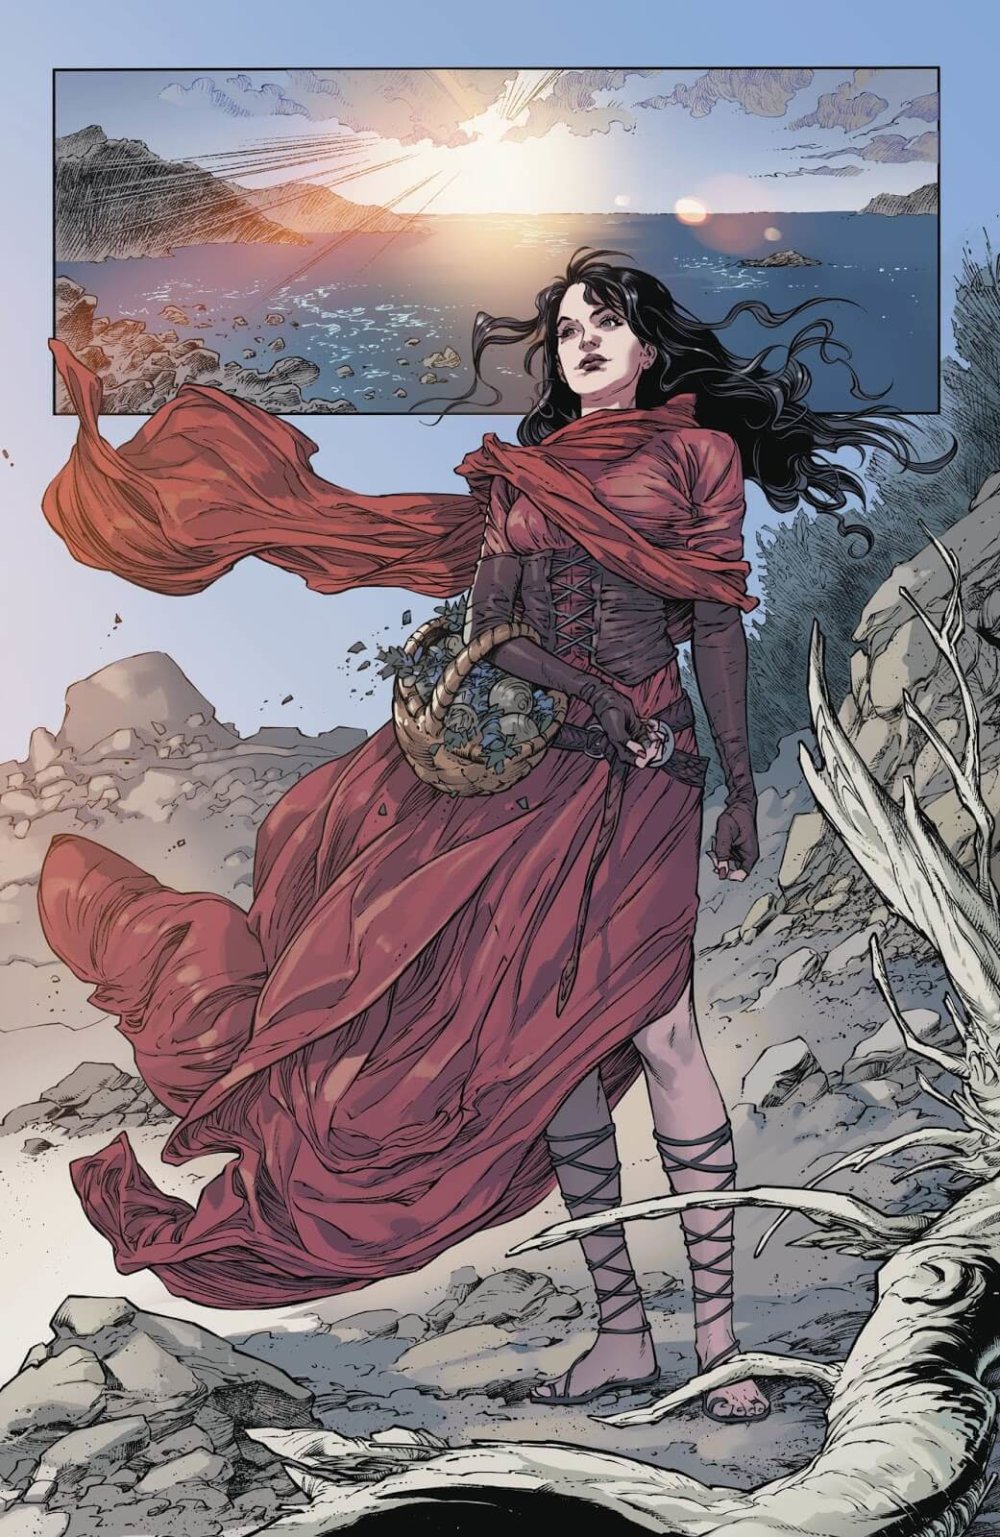 Page from Aquaman #43. Caille stands on the coast, her dress billowing in the wind.